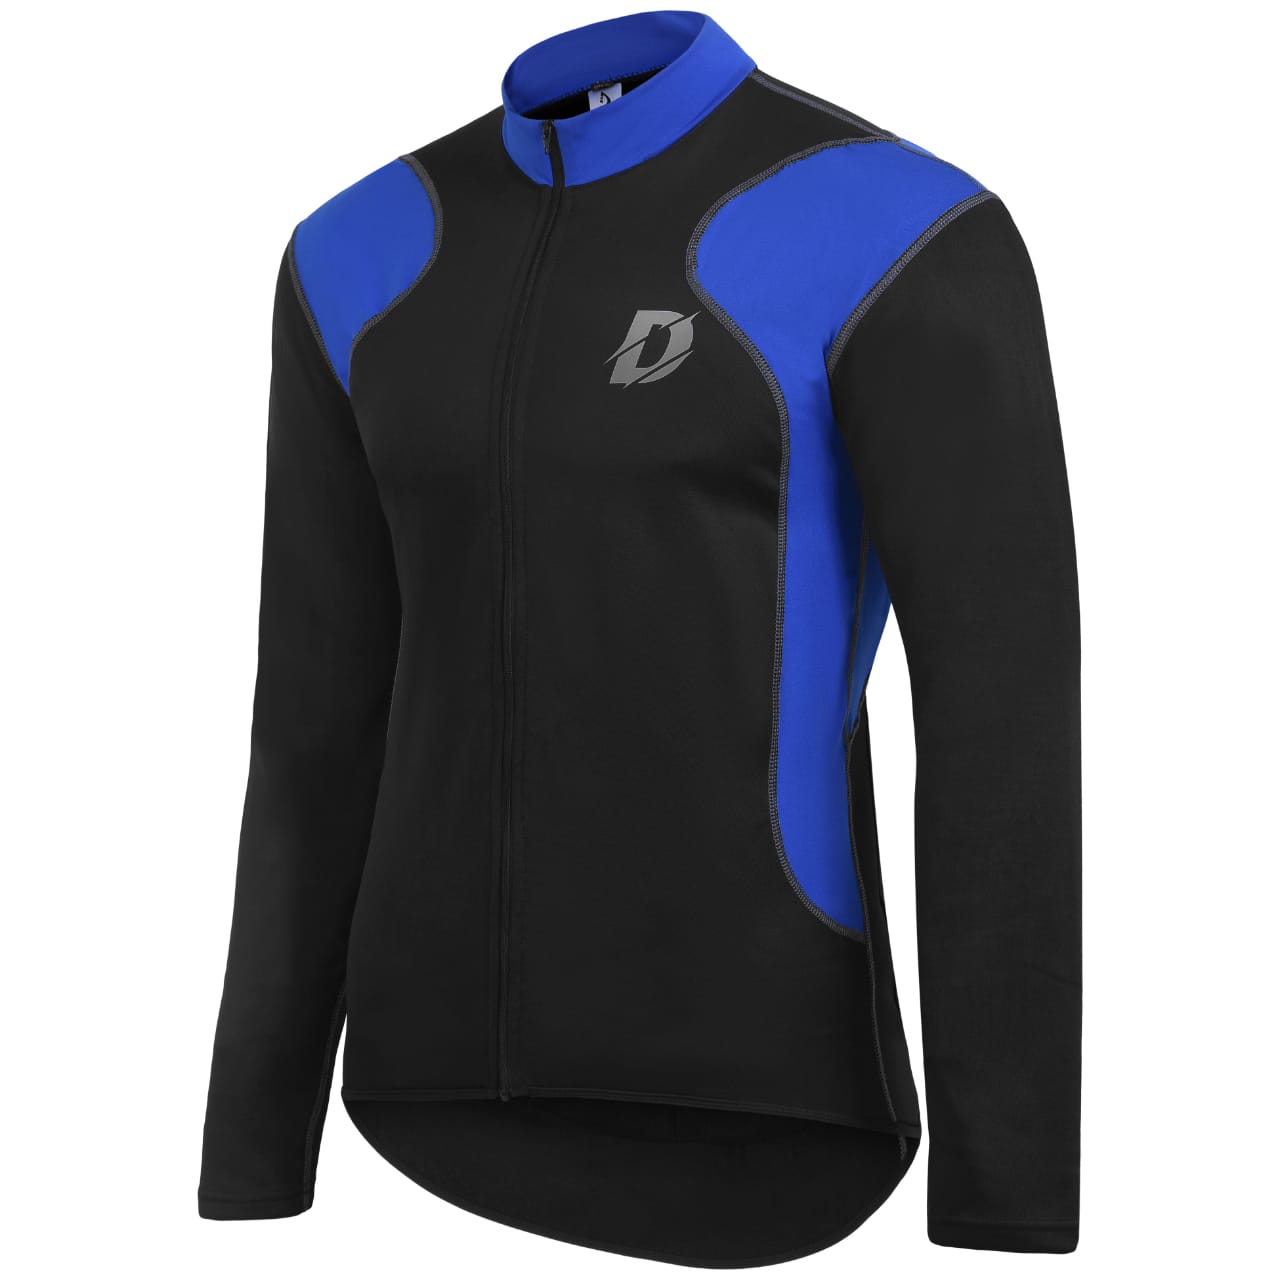 Mens Cycling Jersey Long Sleeves Thermal Outdoor Winter Bicycle Fleece Shirt Black/Blue